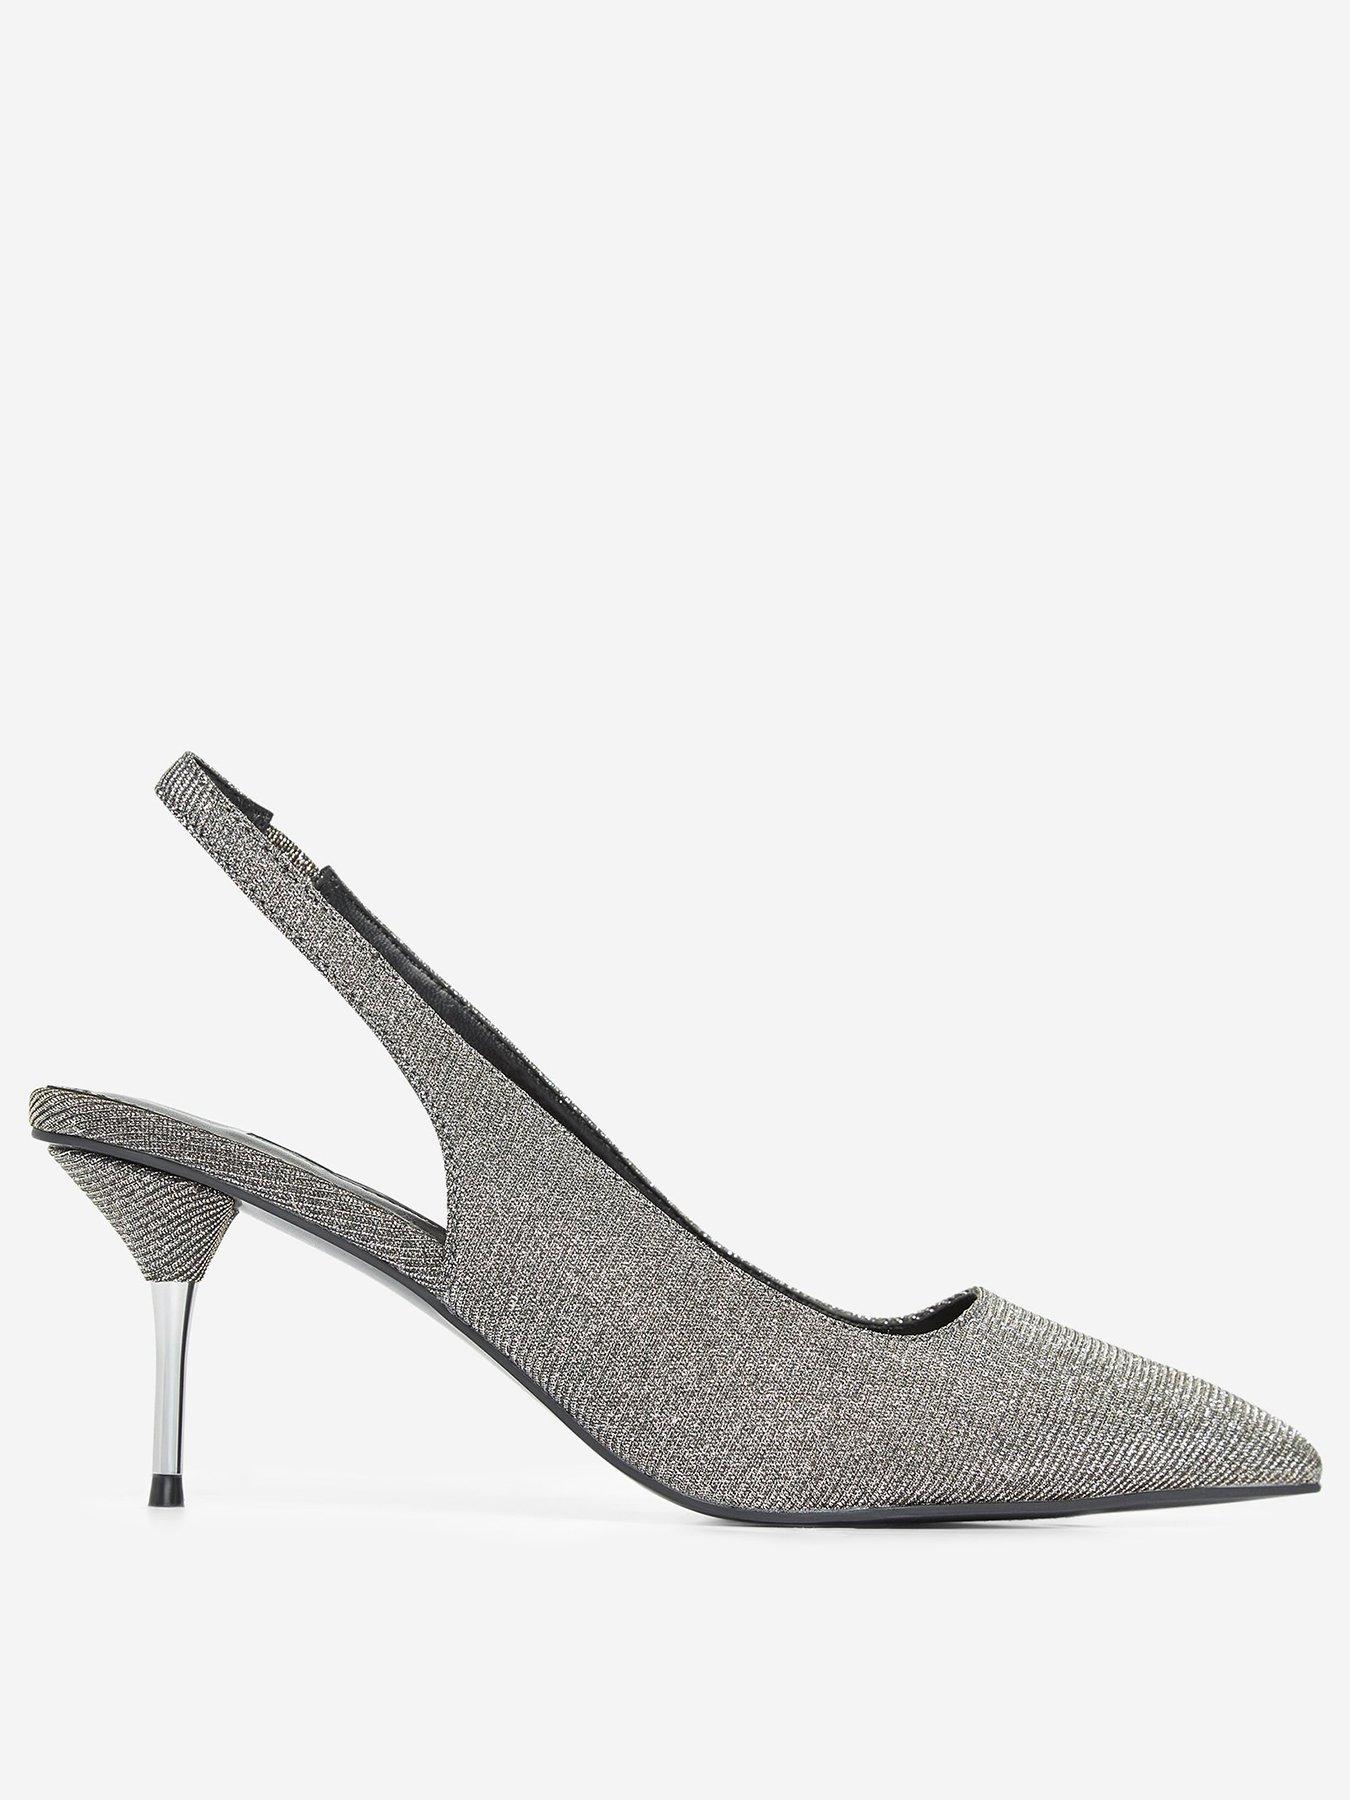 dorothy perkins silver shoes sale